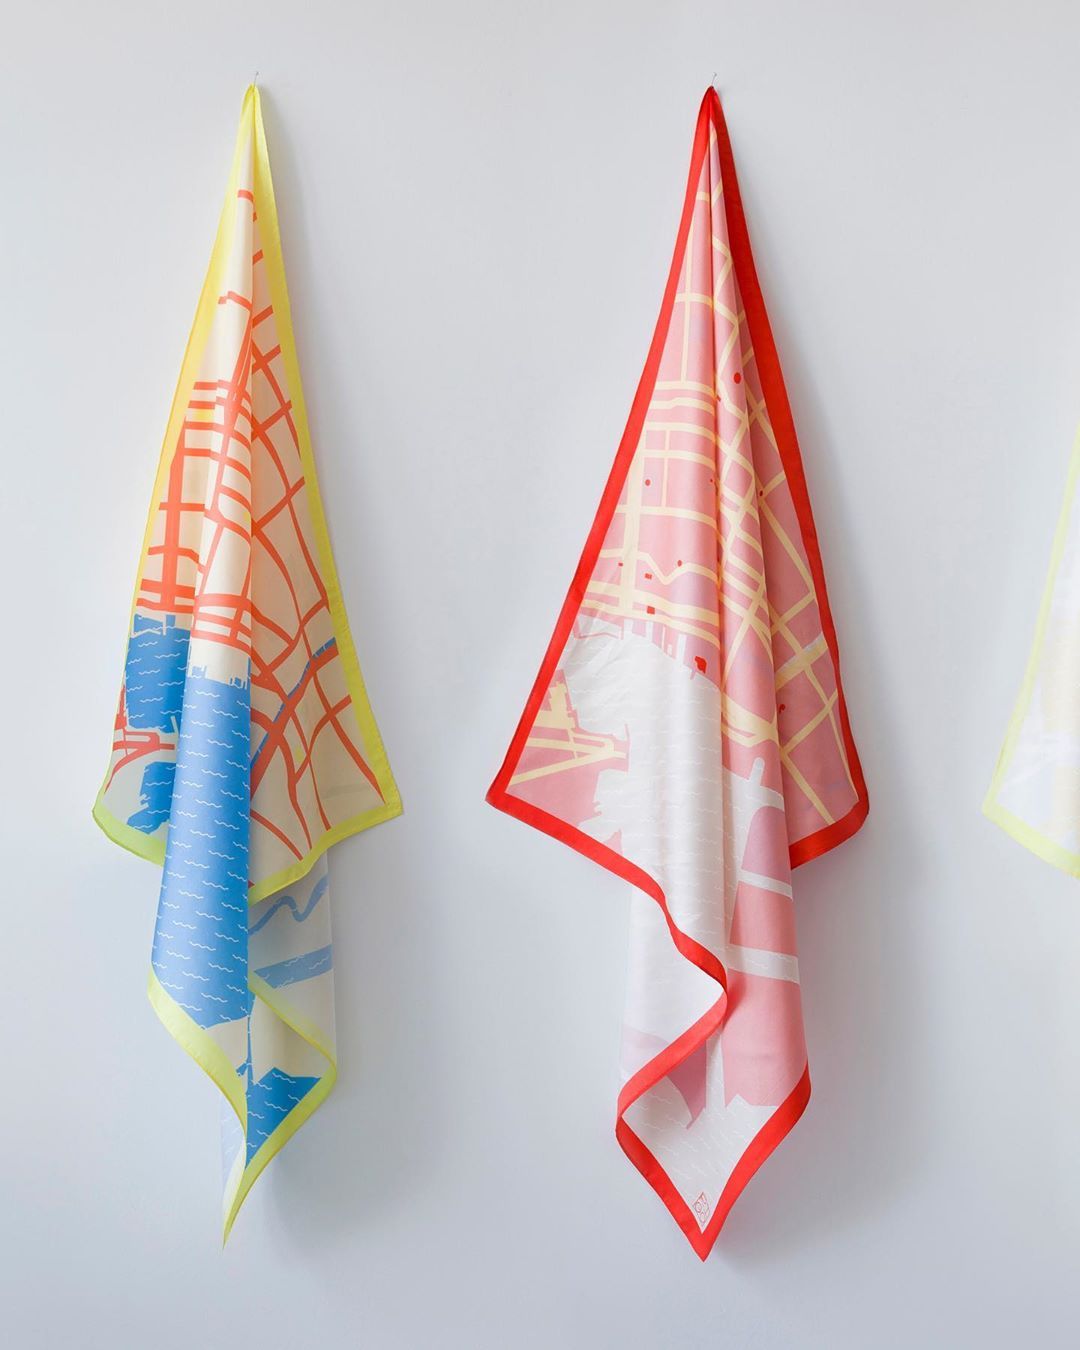 Common Threads, 2020. Artist edition commissioned by Daniels Lighthouse.
A series of 5 silk scarves with abstract maps to neighbourhood landmarks like public art and water fountains. It’s been fun and crazy to pivot in some new textile works during...